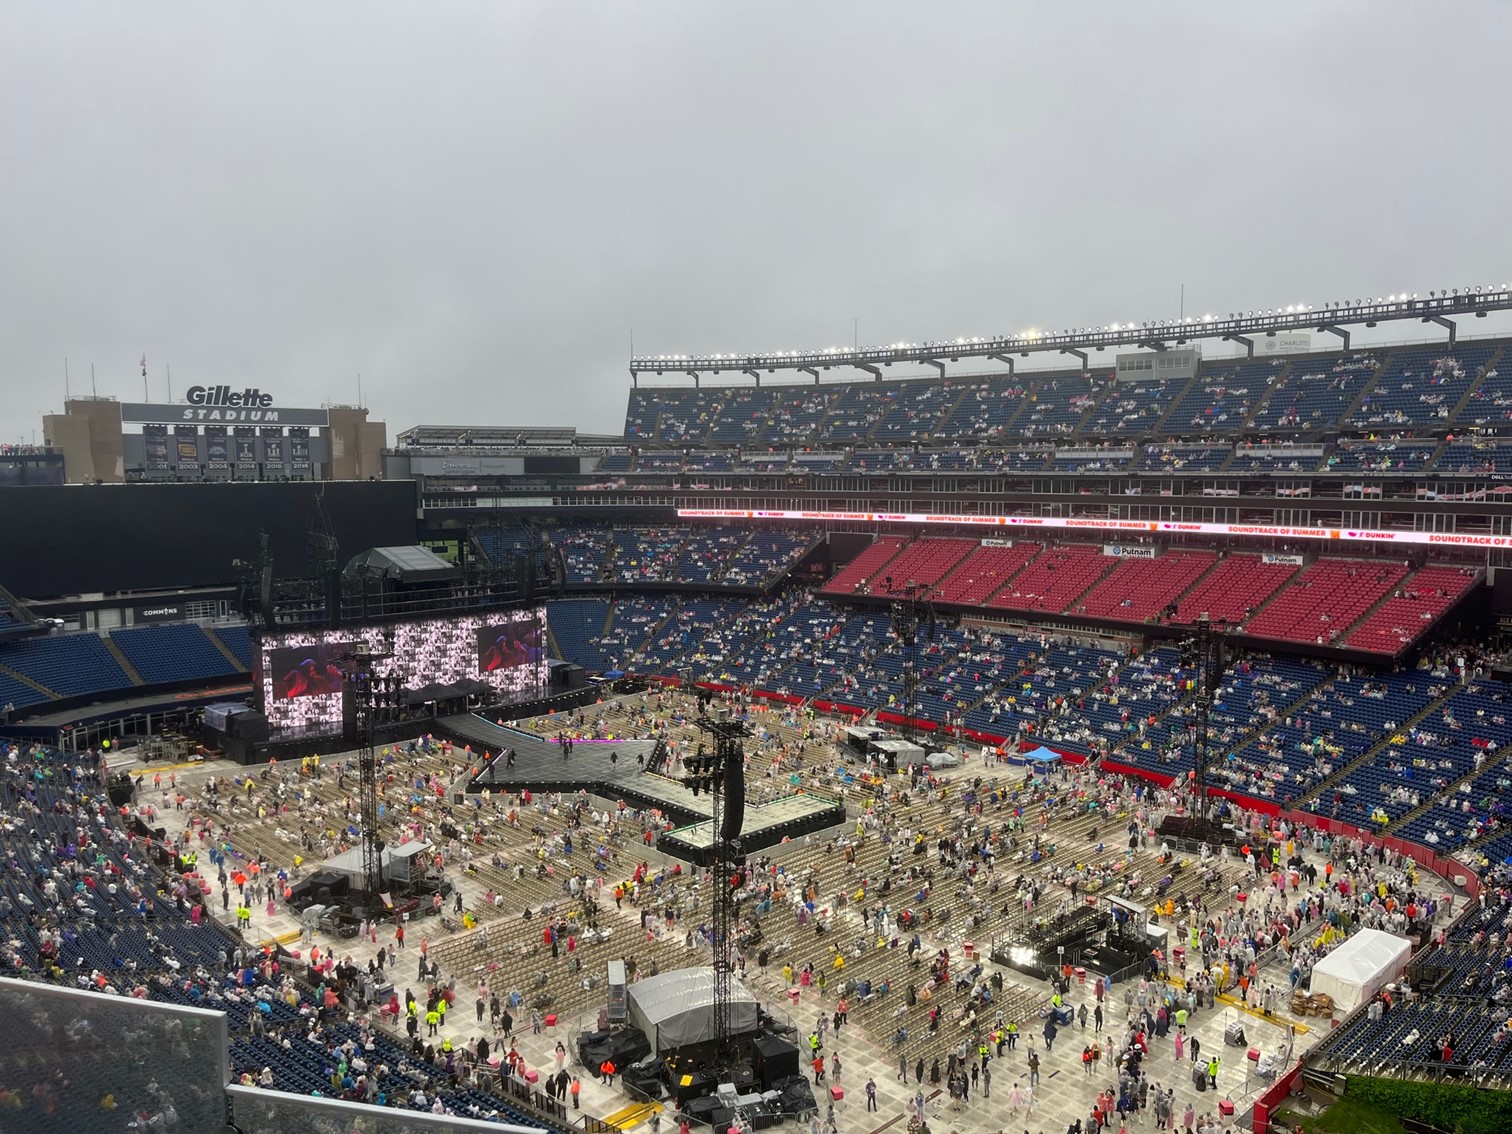 section 301, row 3 seat view  for concert - gillette stadium